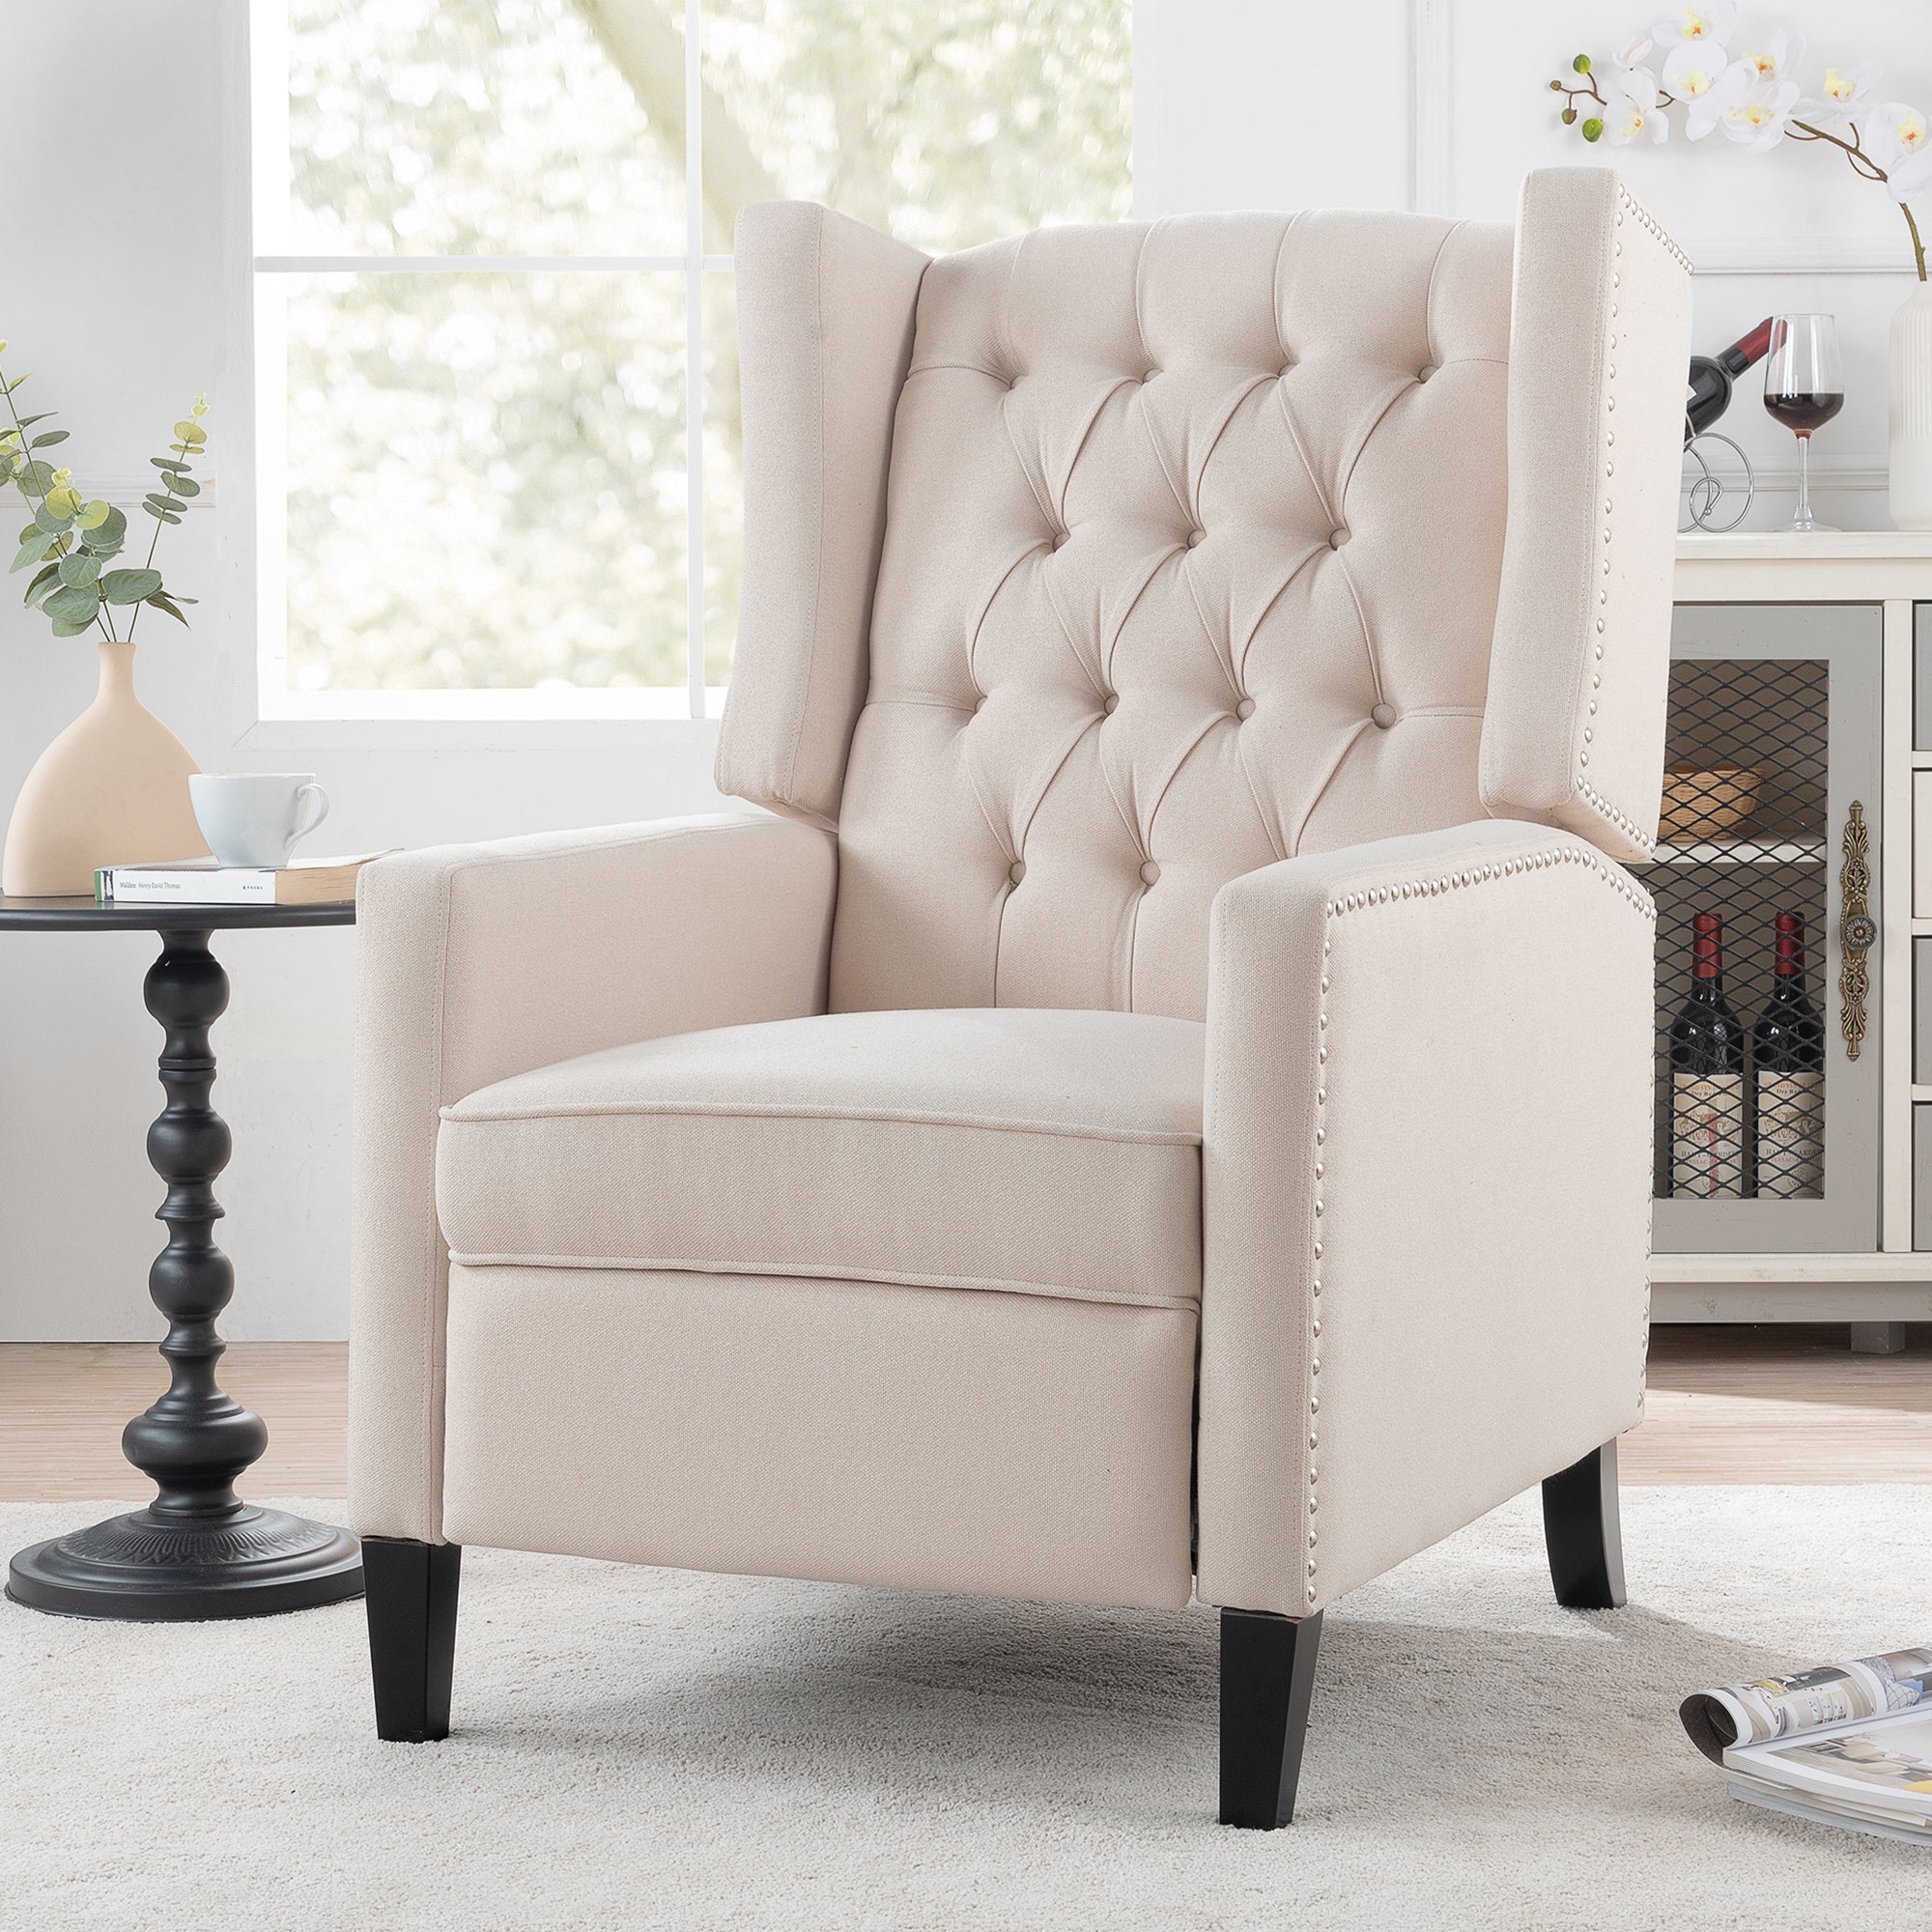 Blaine Beige Linen Fabric Pushback Recliner Wing Chair With Nailhead Trim